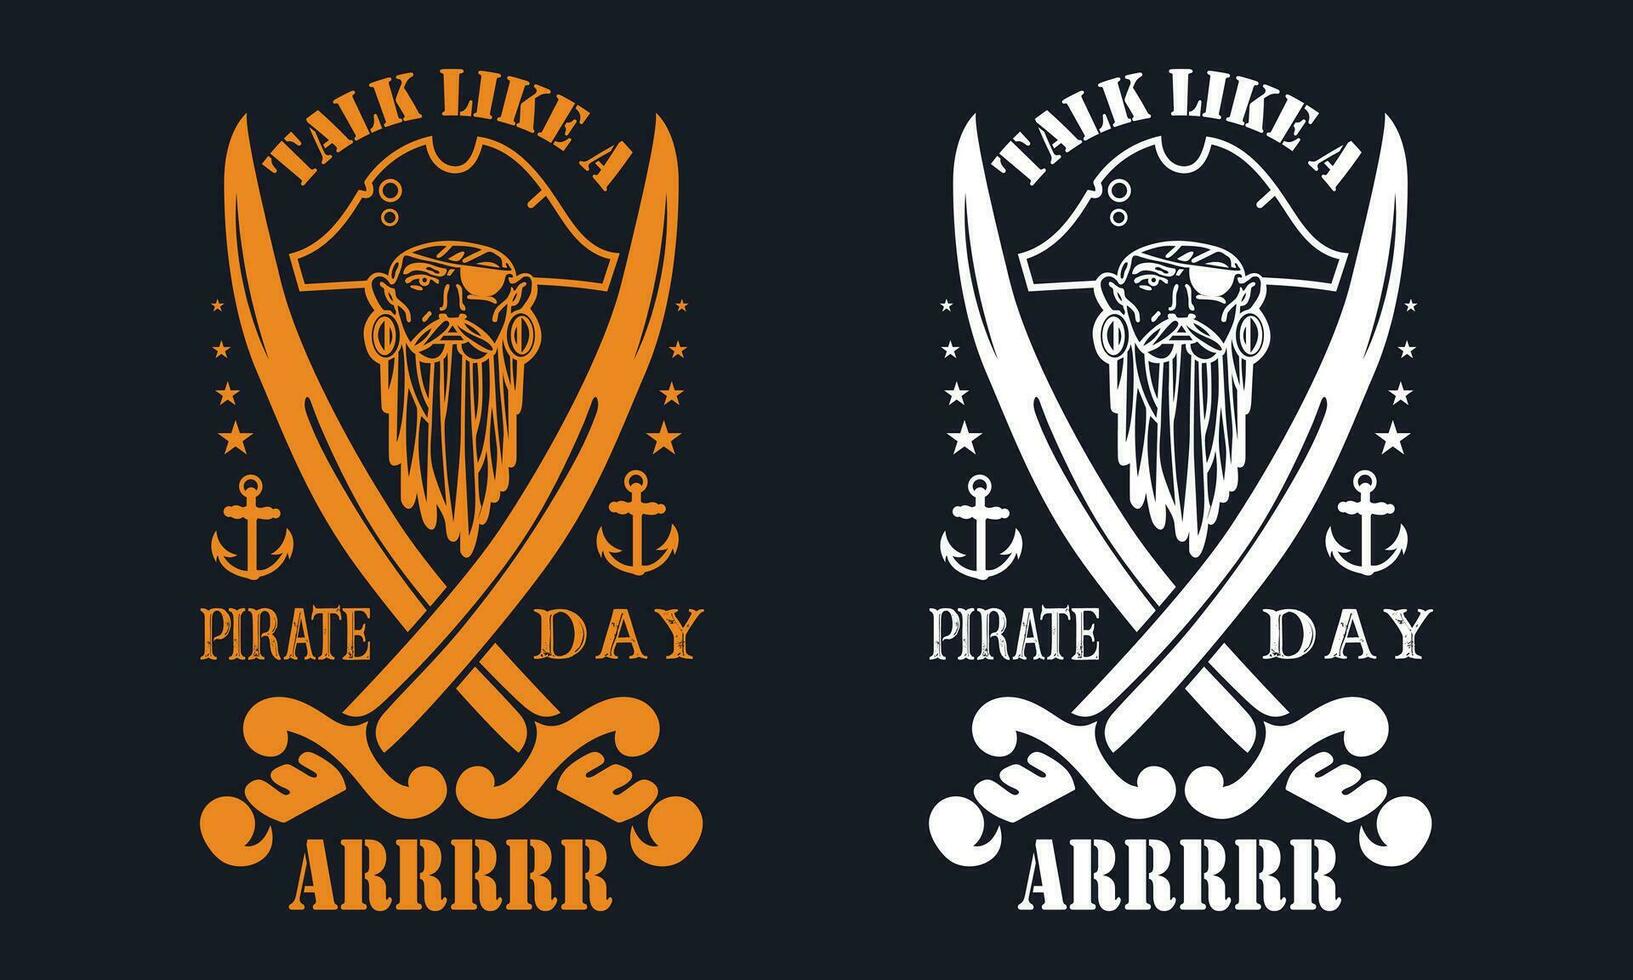 Talk Like A Pirate Day Arrrrr T shirt Design Vector. Skull in pirate bandana with knife in mouth. Print for T-shirt, typography, vintage graphic print for t shirt , fashion, sticker, posters and other vector